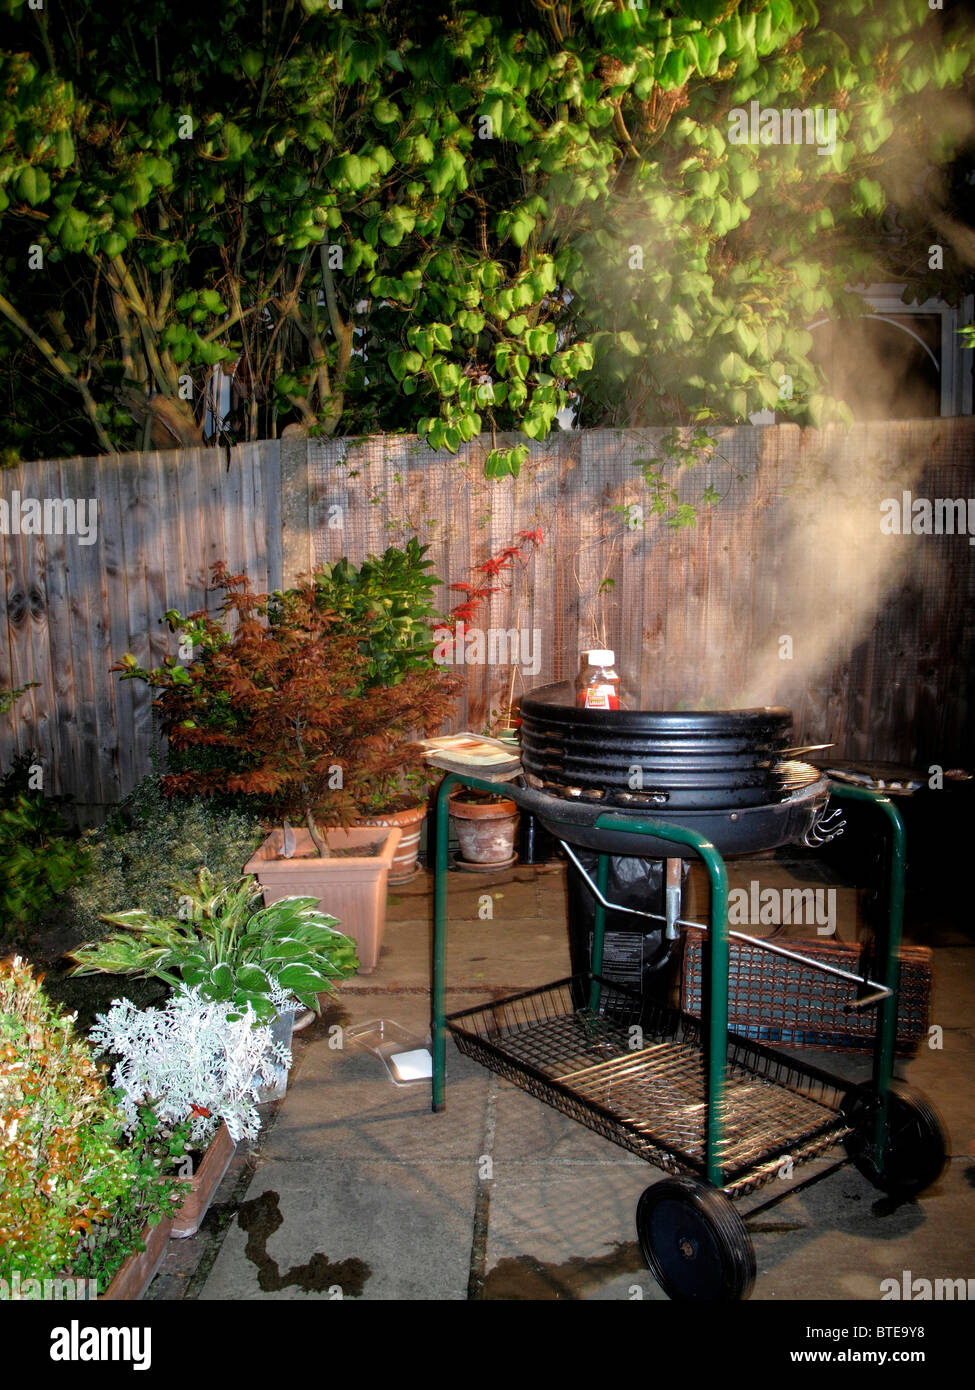 Barbecue grill being used at night Stock Photo